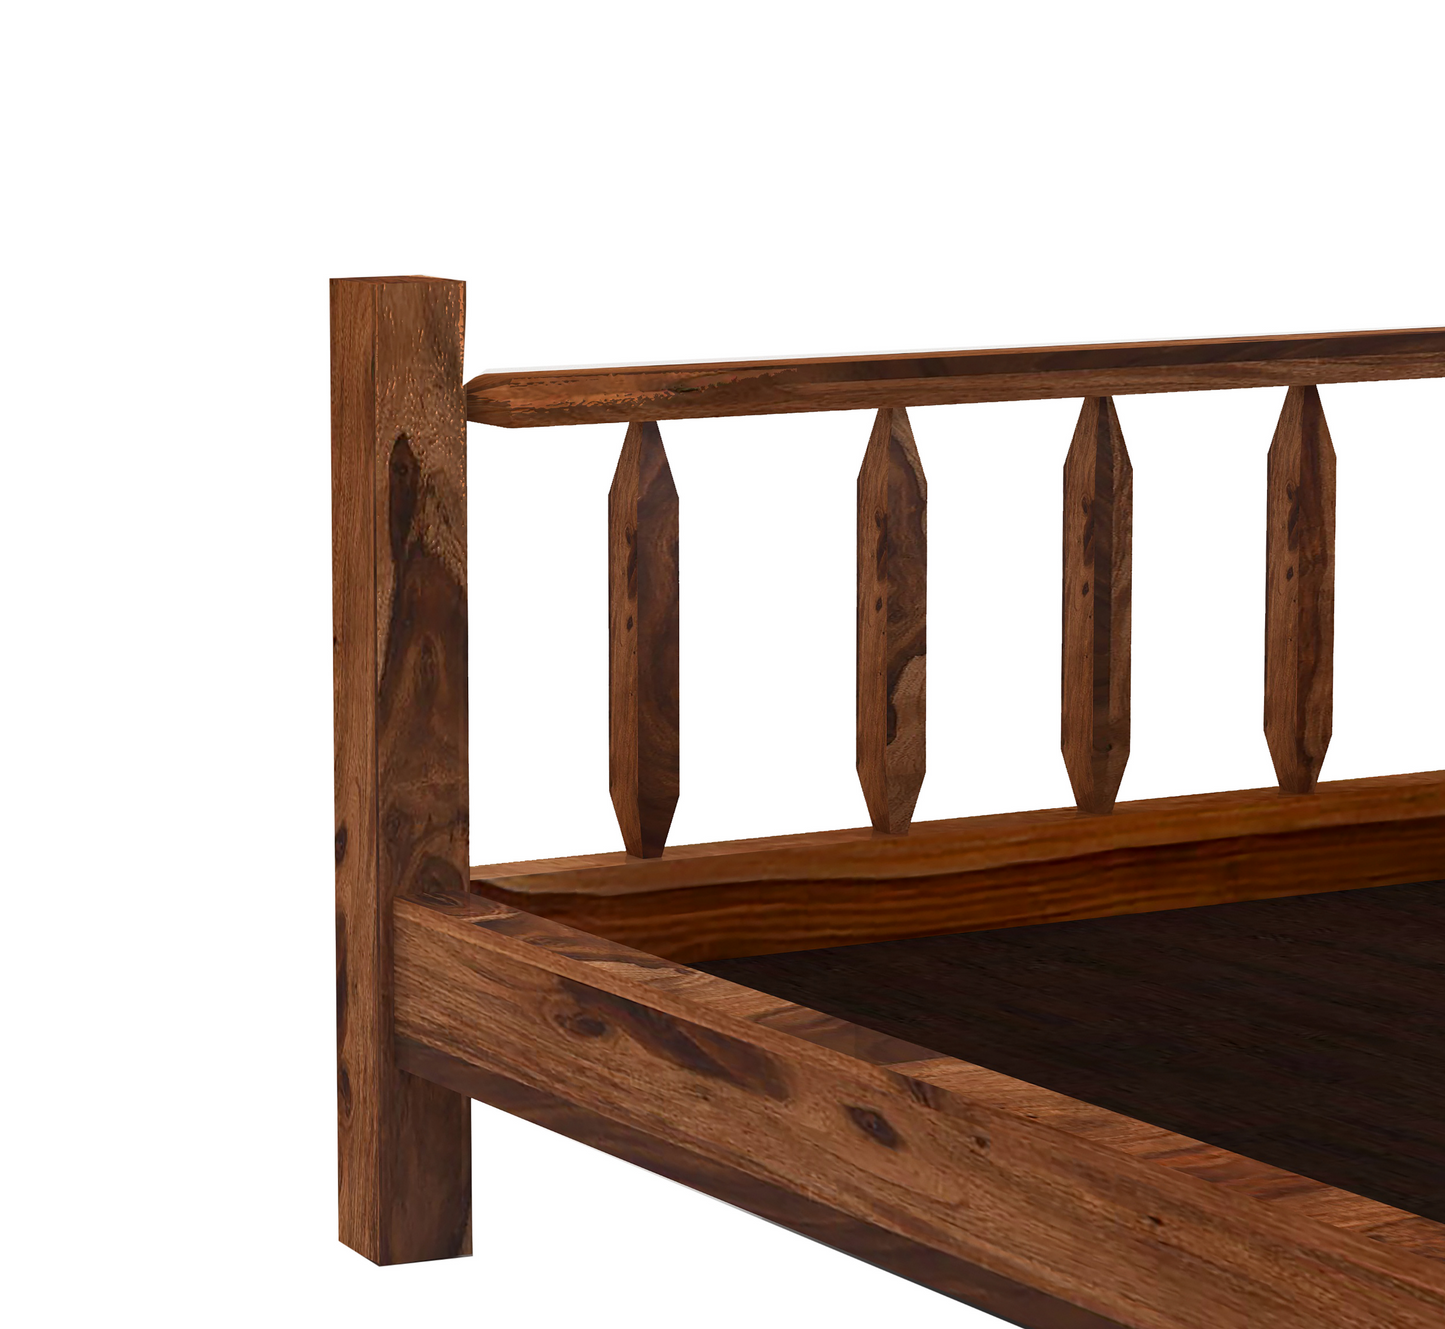 Kaira 100% Solid Wood Bed